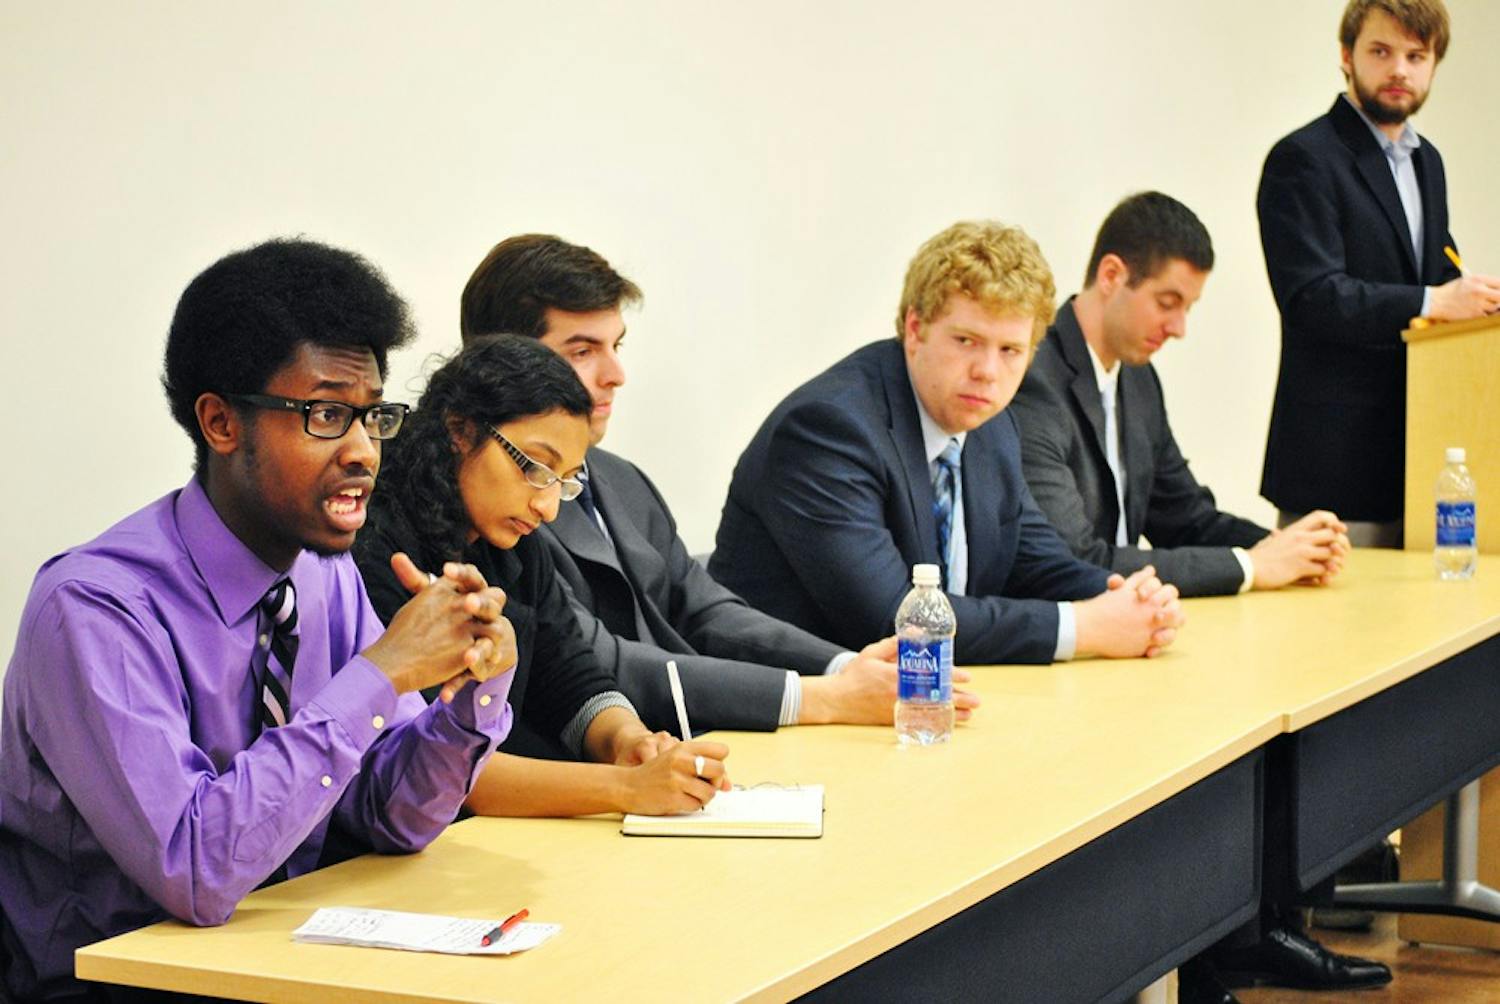 The Daily Tar Heel hosted a debate between the candidates for the Student Body President position. The candidates went over a variety of topics concerning their goals and reasons for becoming Student Body President. 